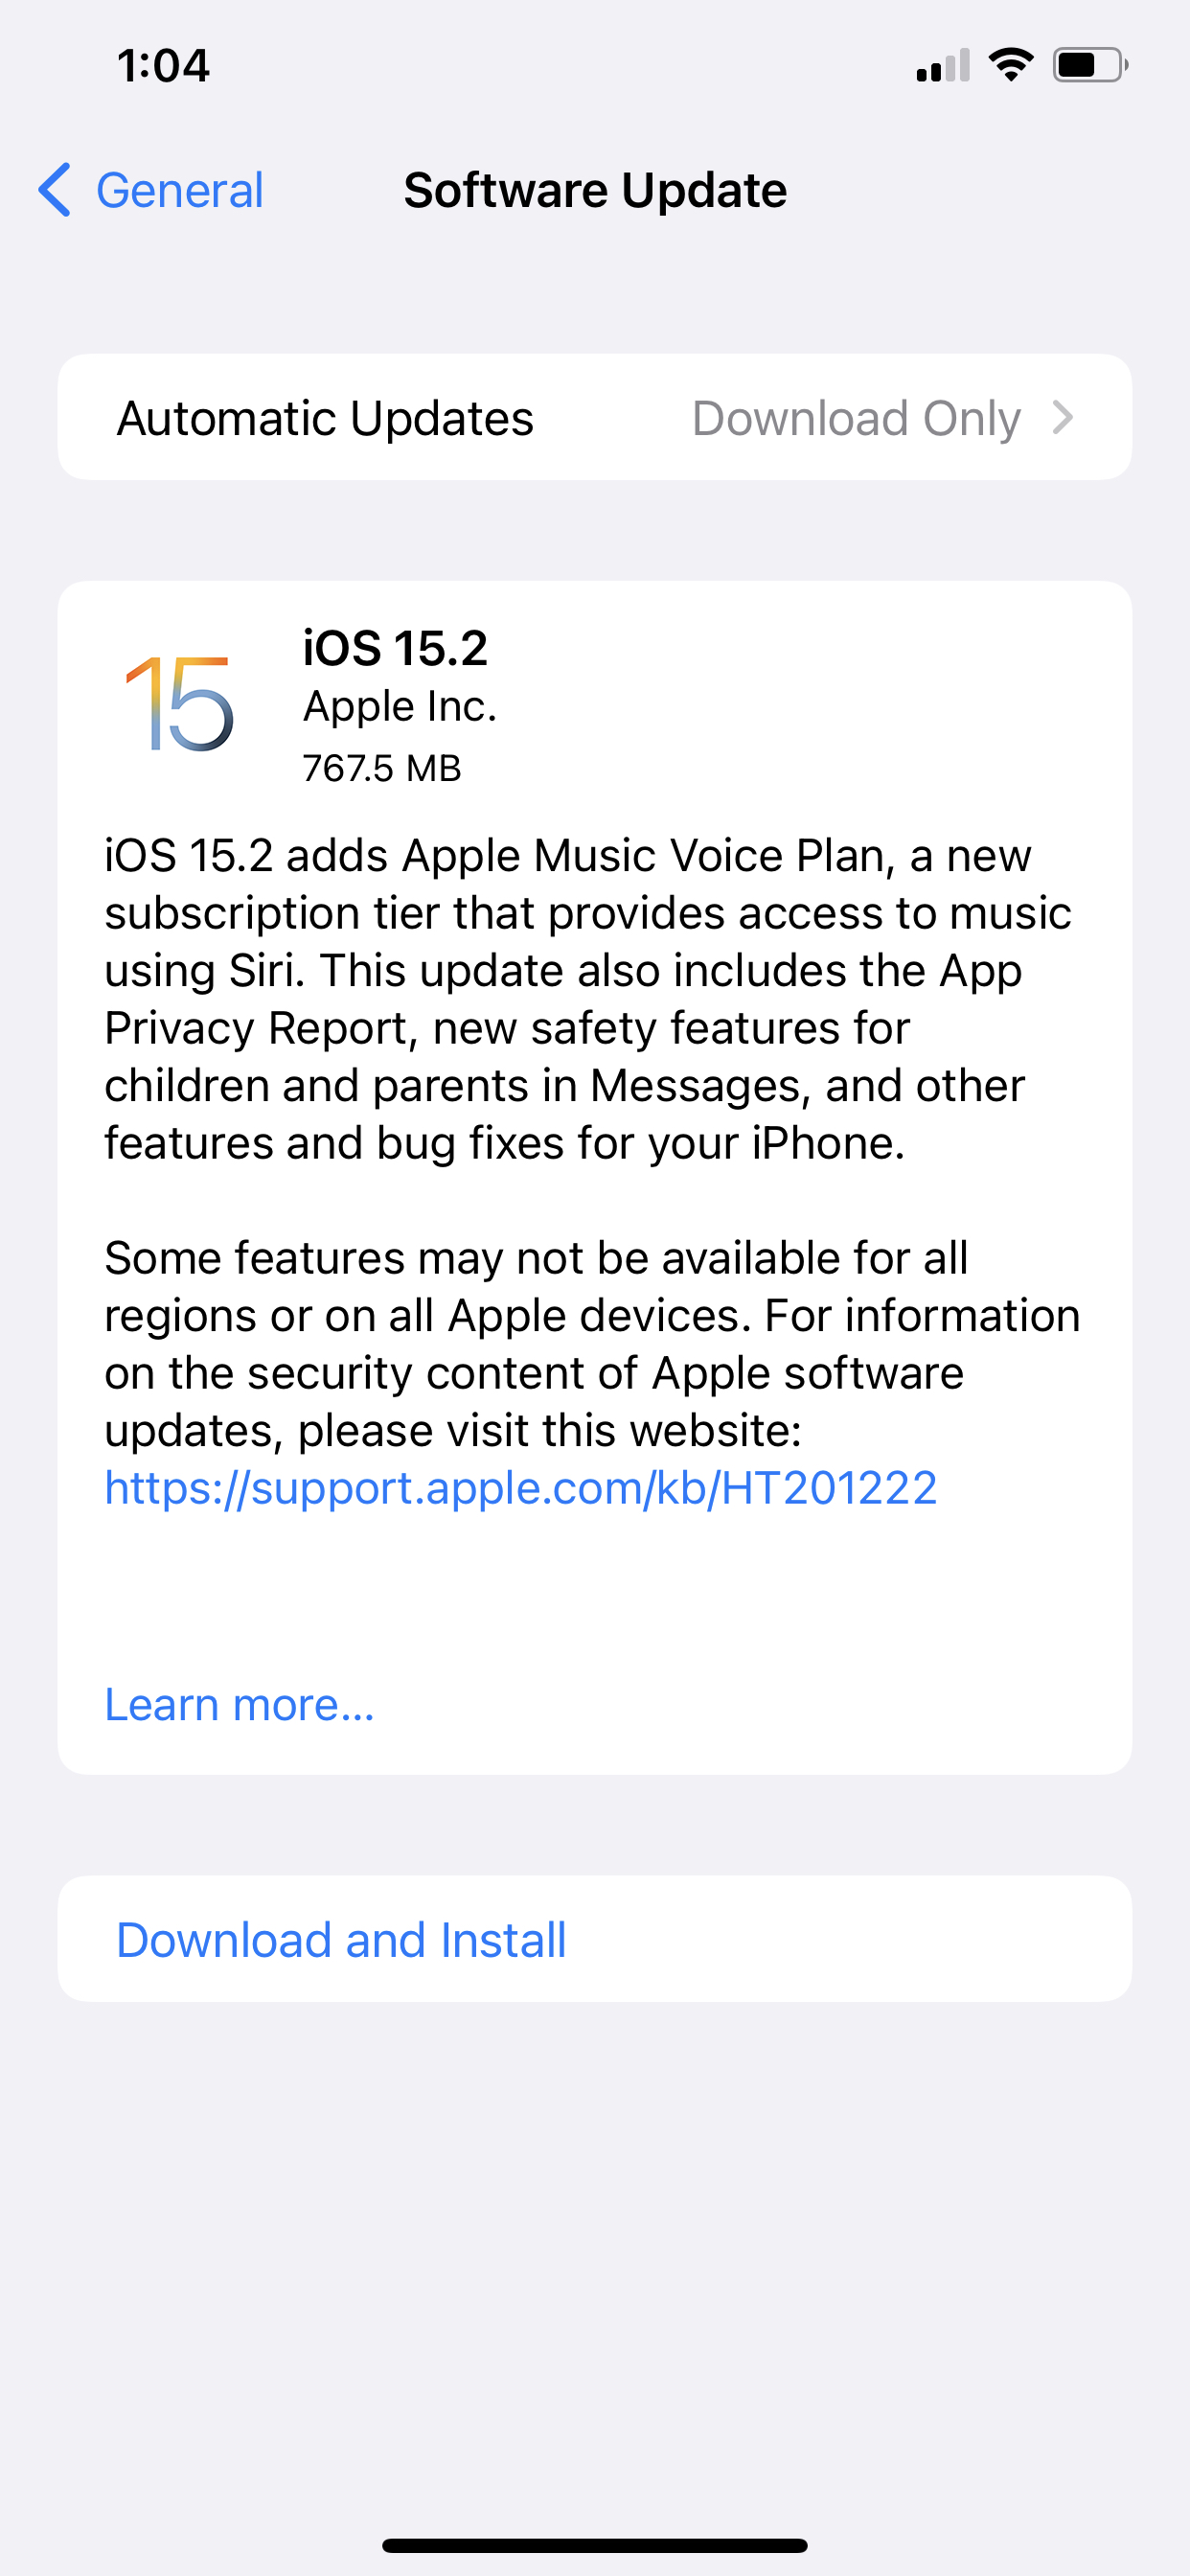 Full Release Notes for iOS 15.2